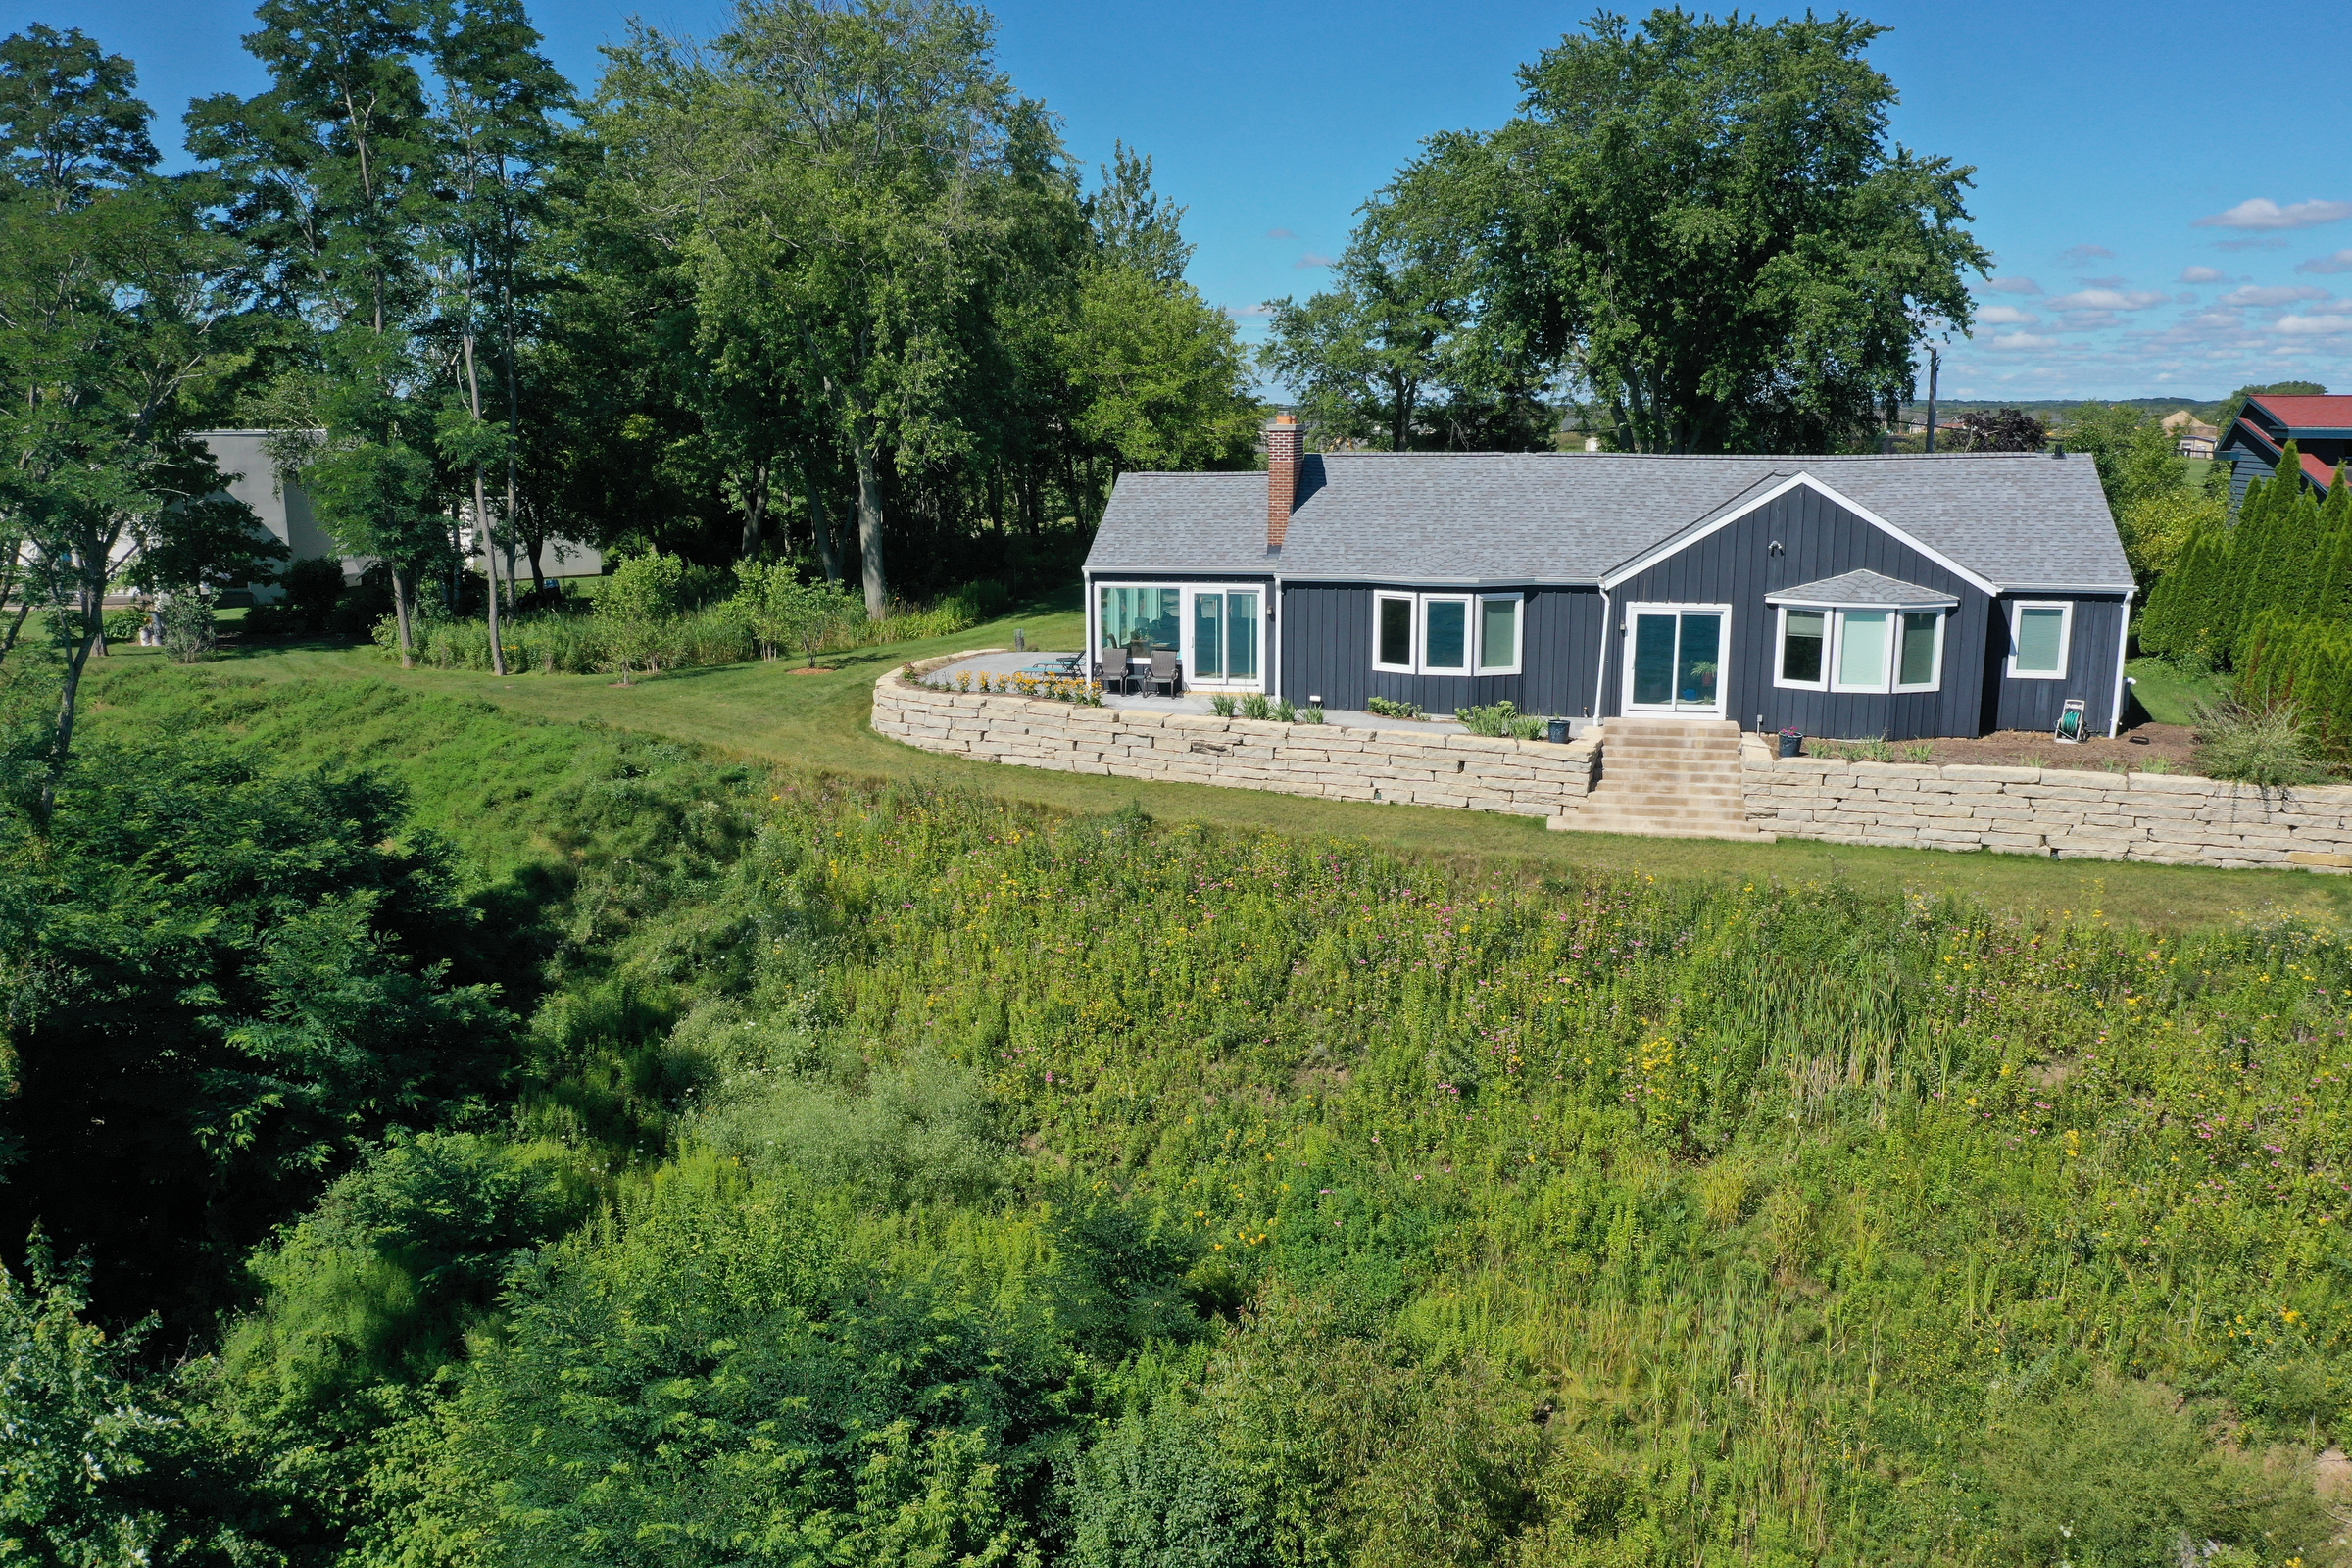 The house belonging to David Spector is seen perched on a 120-foot bluff in Mequon, Wis